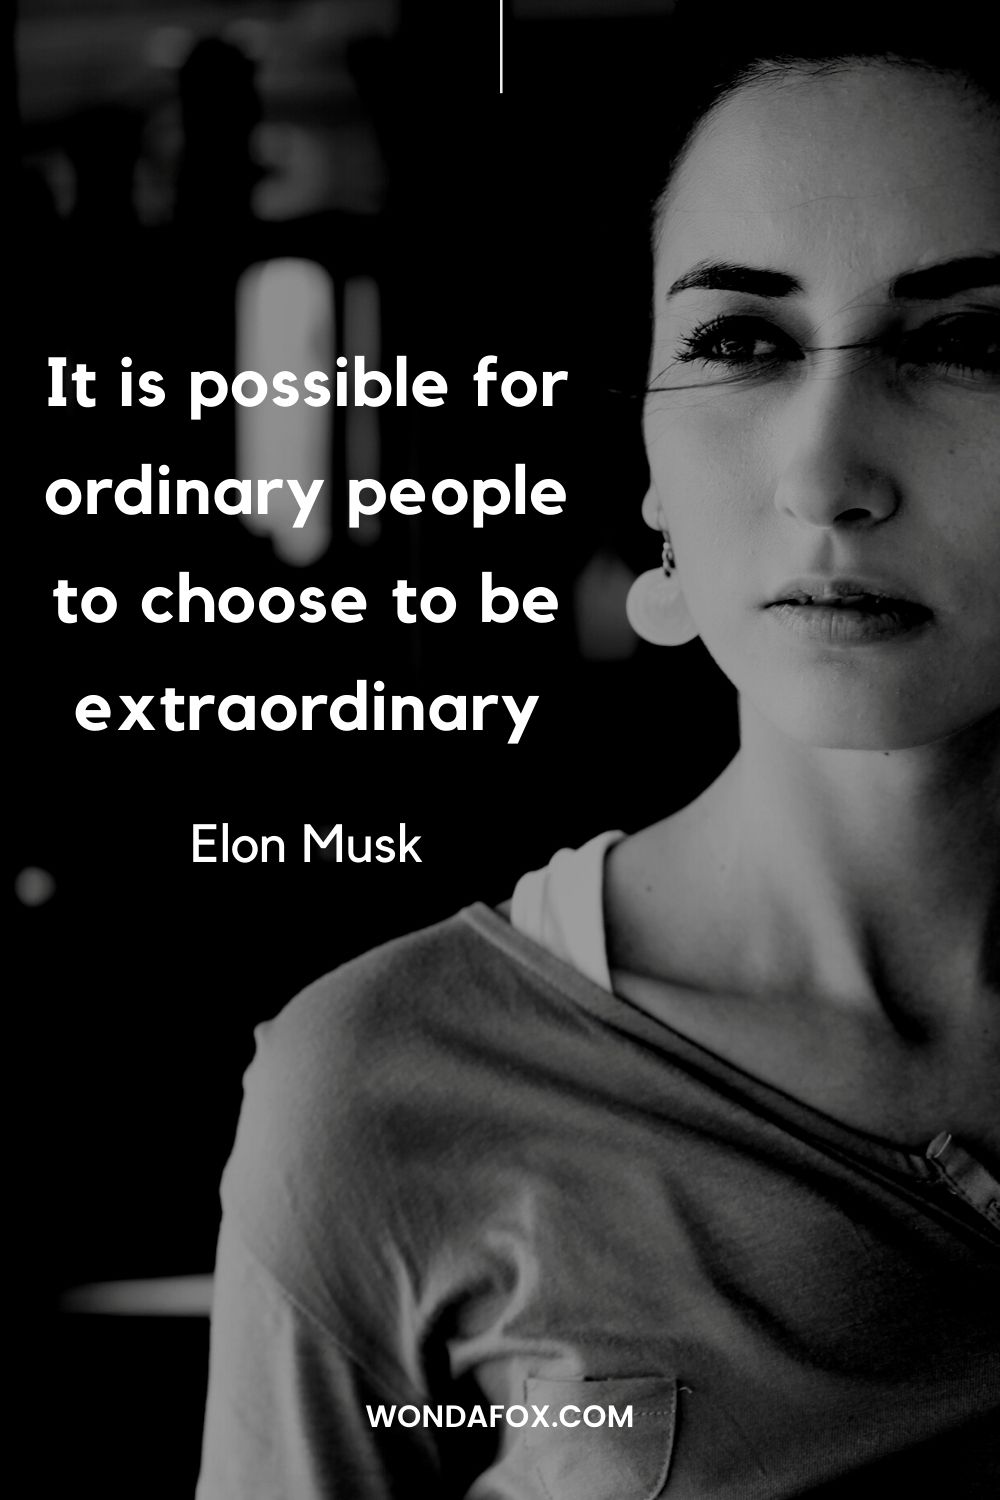 It is possible for ordinary people to choose to be extraordinary